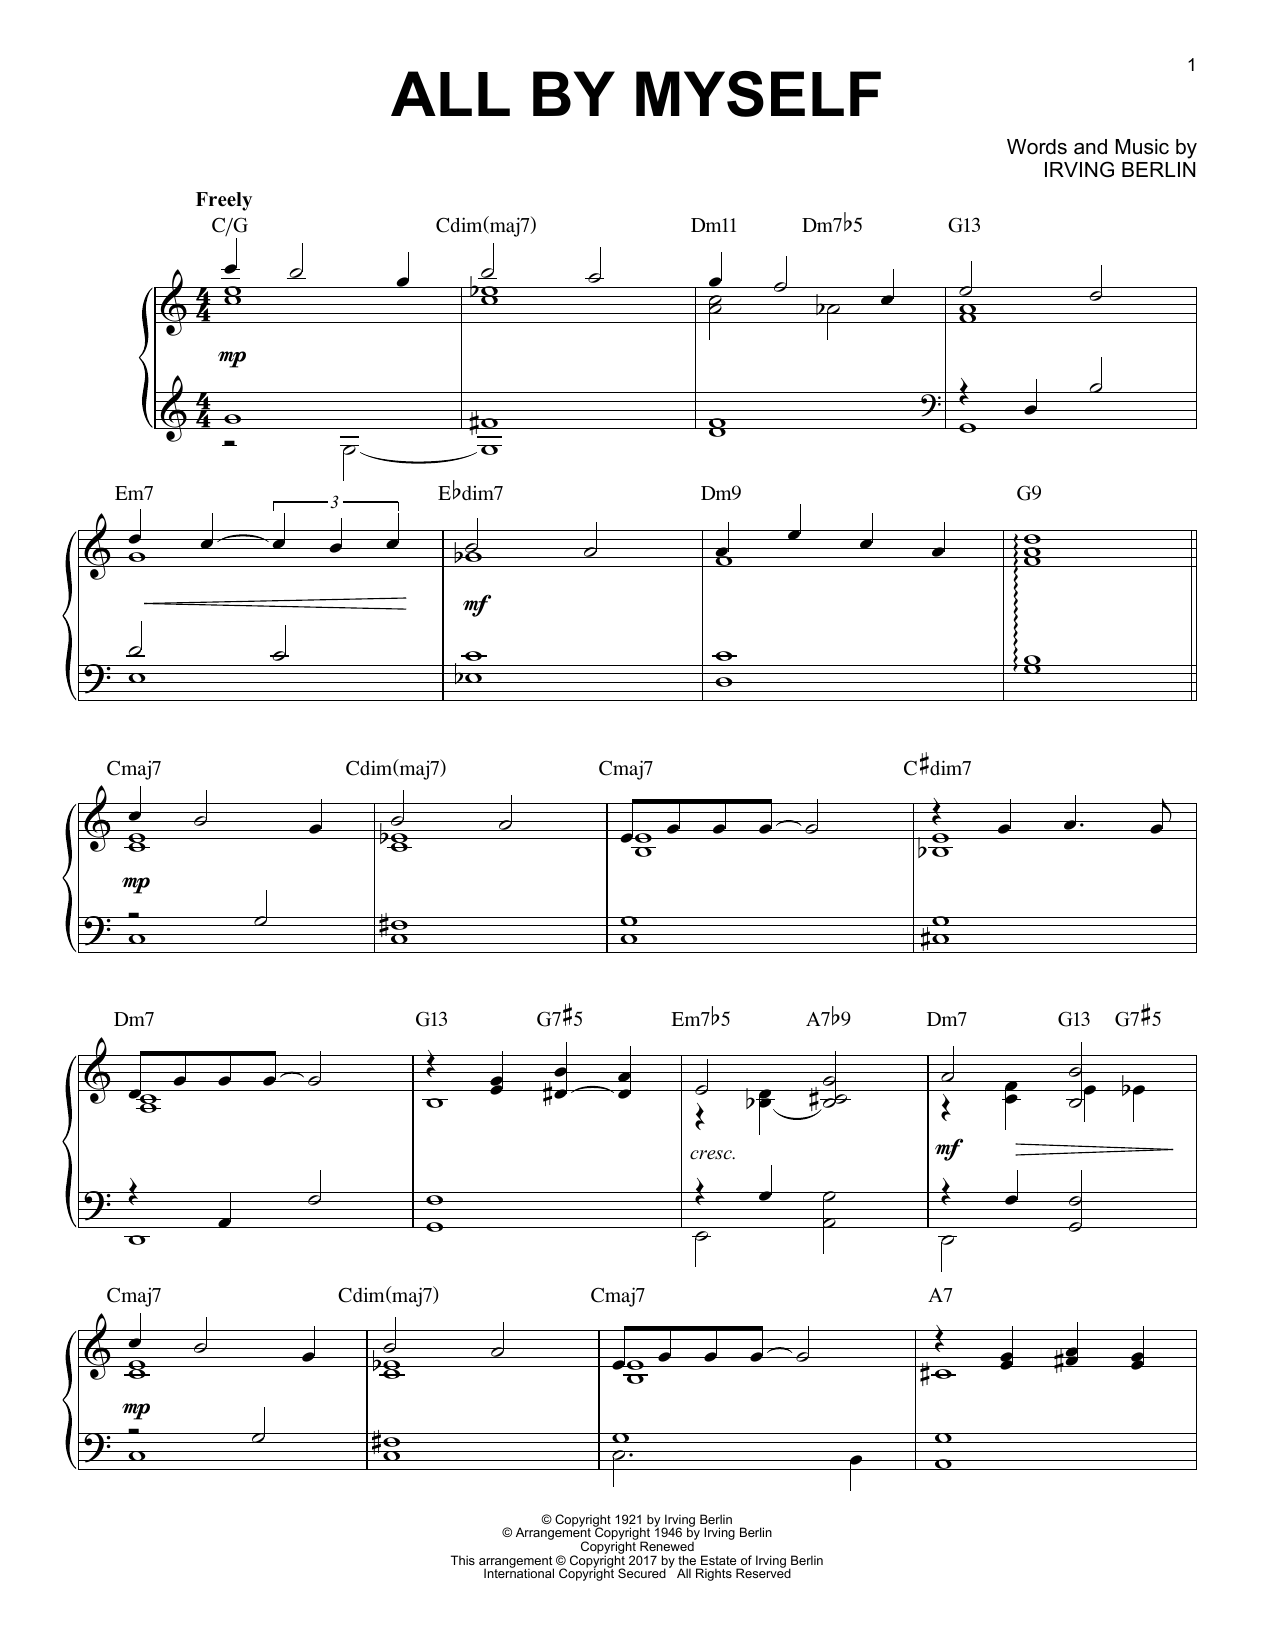 Irving Berlin All By Myself [Jazz version] sheet music notes and chords. Download Printable PDF.